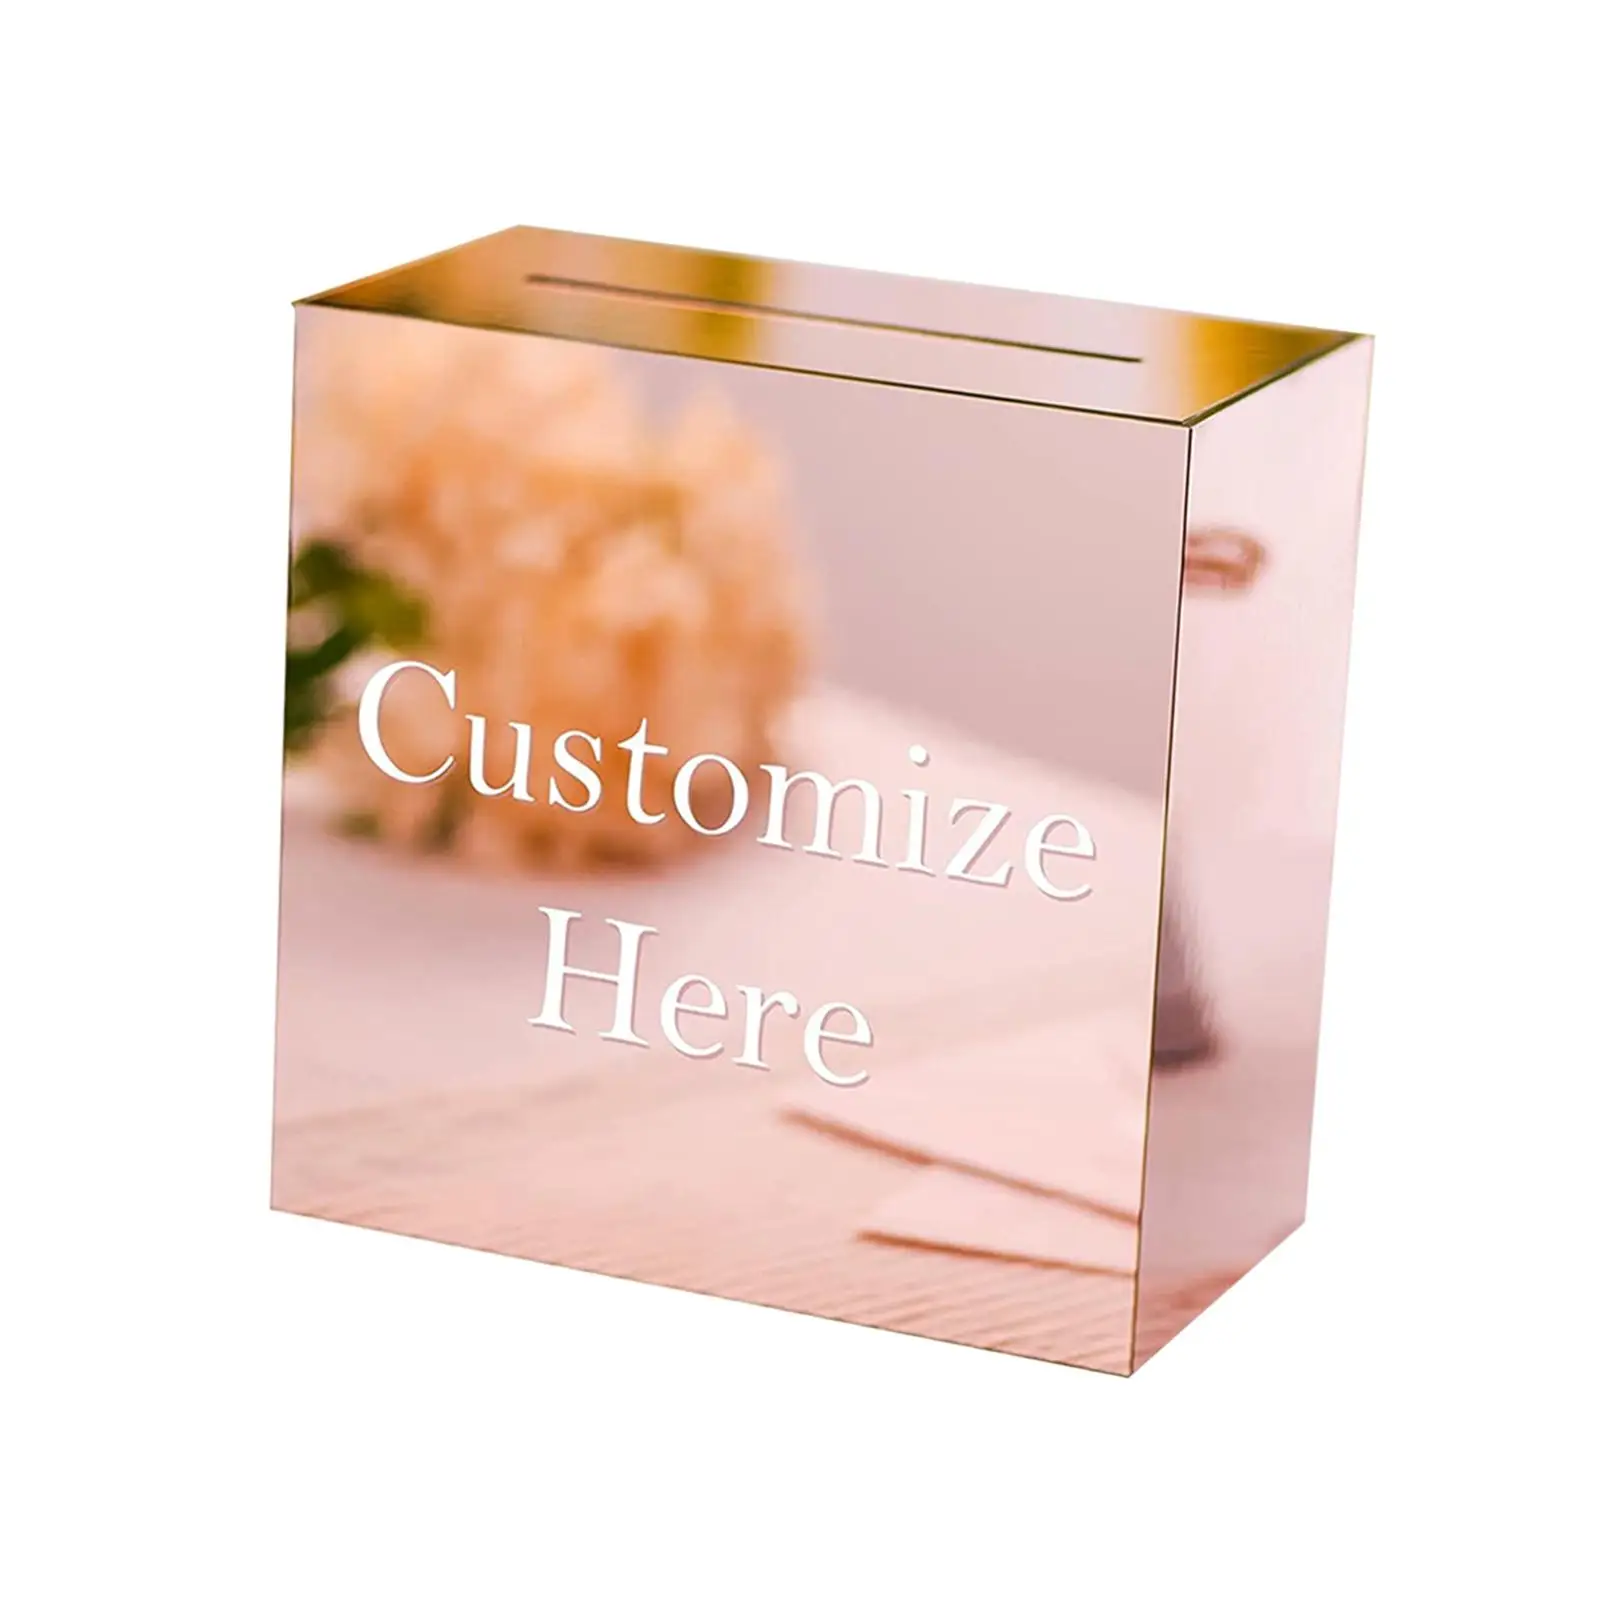 Acrylic wedding, Large Decorations Blessing DIY Large Acrylic Card Box, for Party Graduation Anniversary Shower